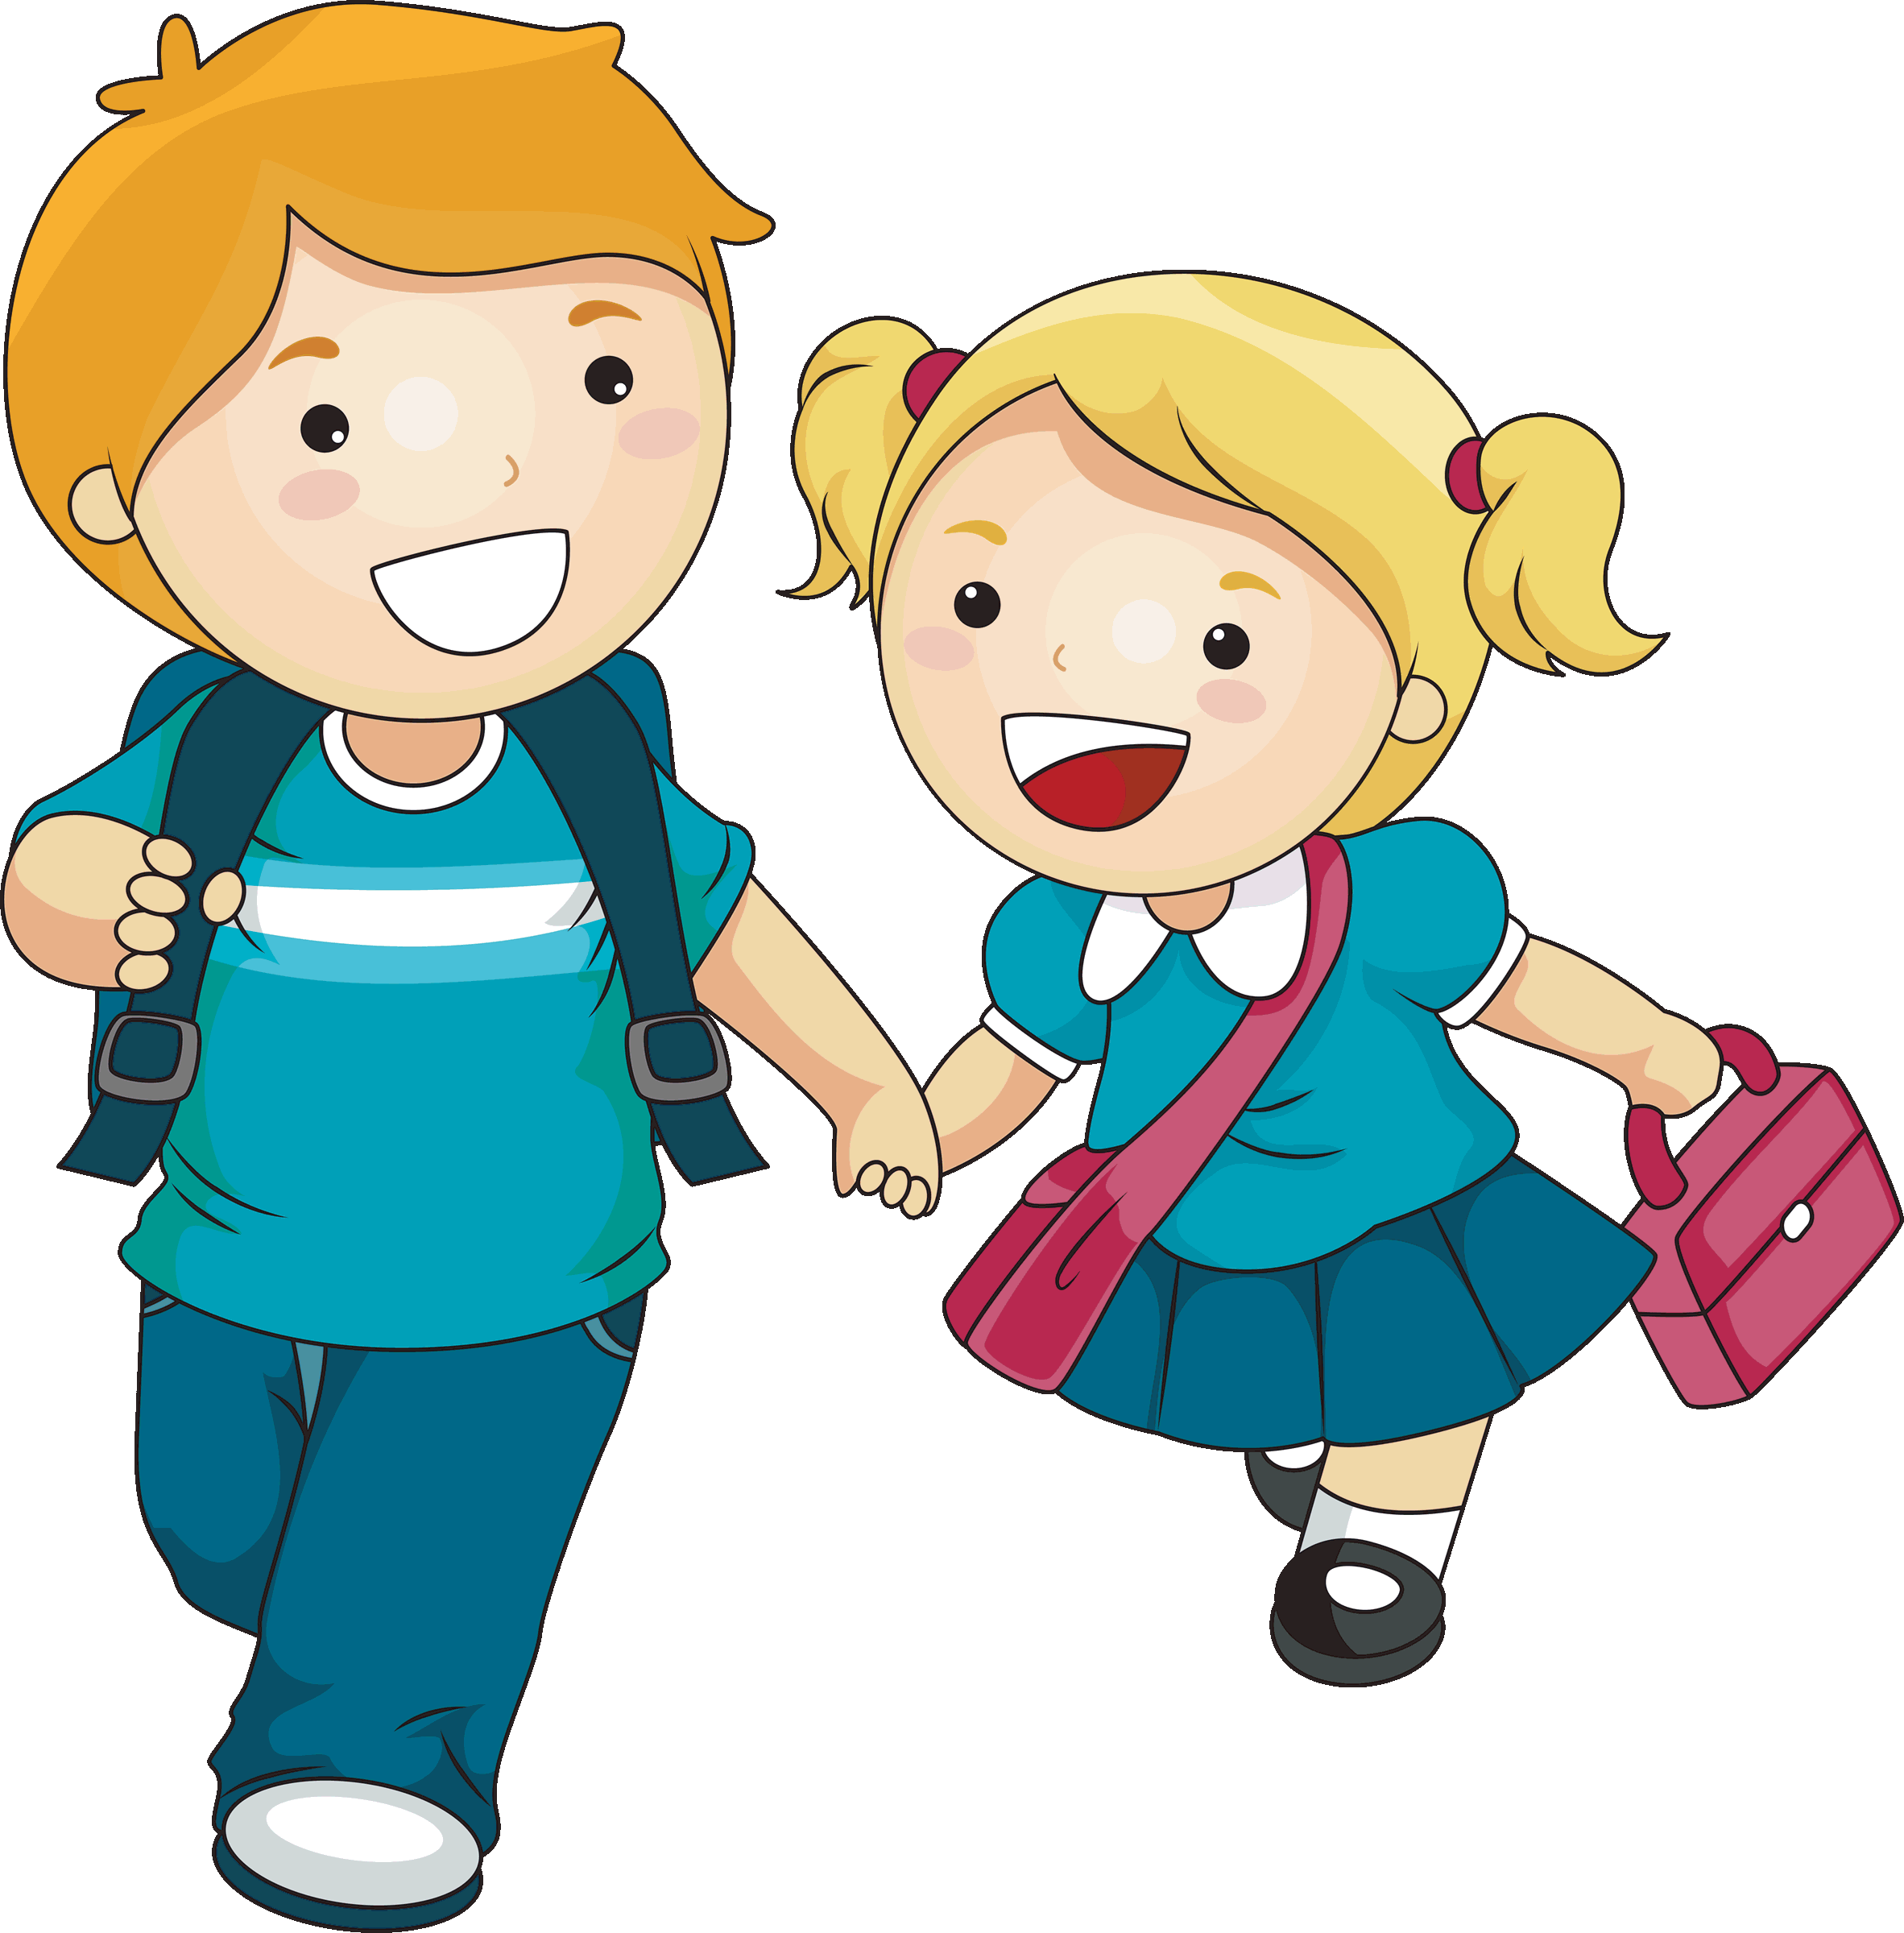 Two School Kids | Clipart Panda - Free Clipart Images